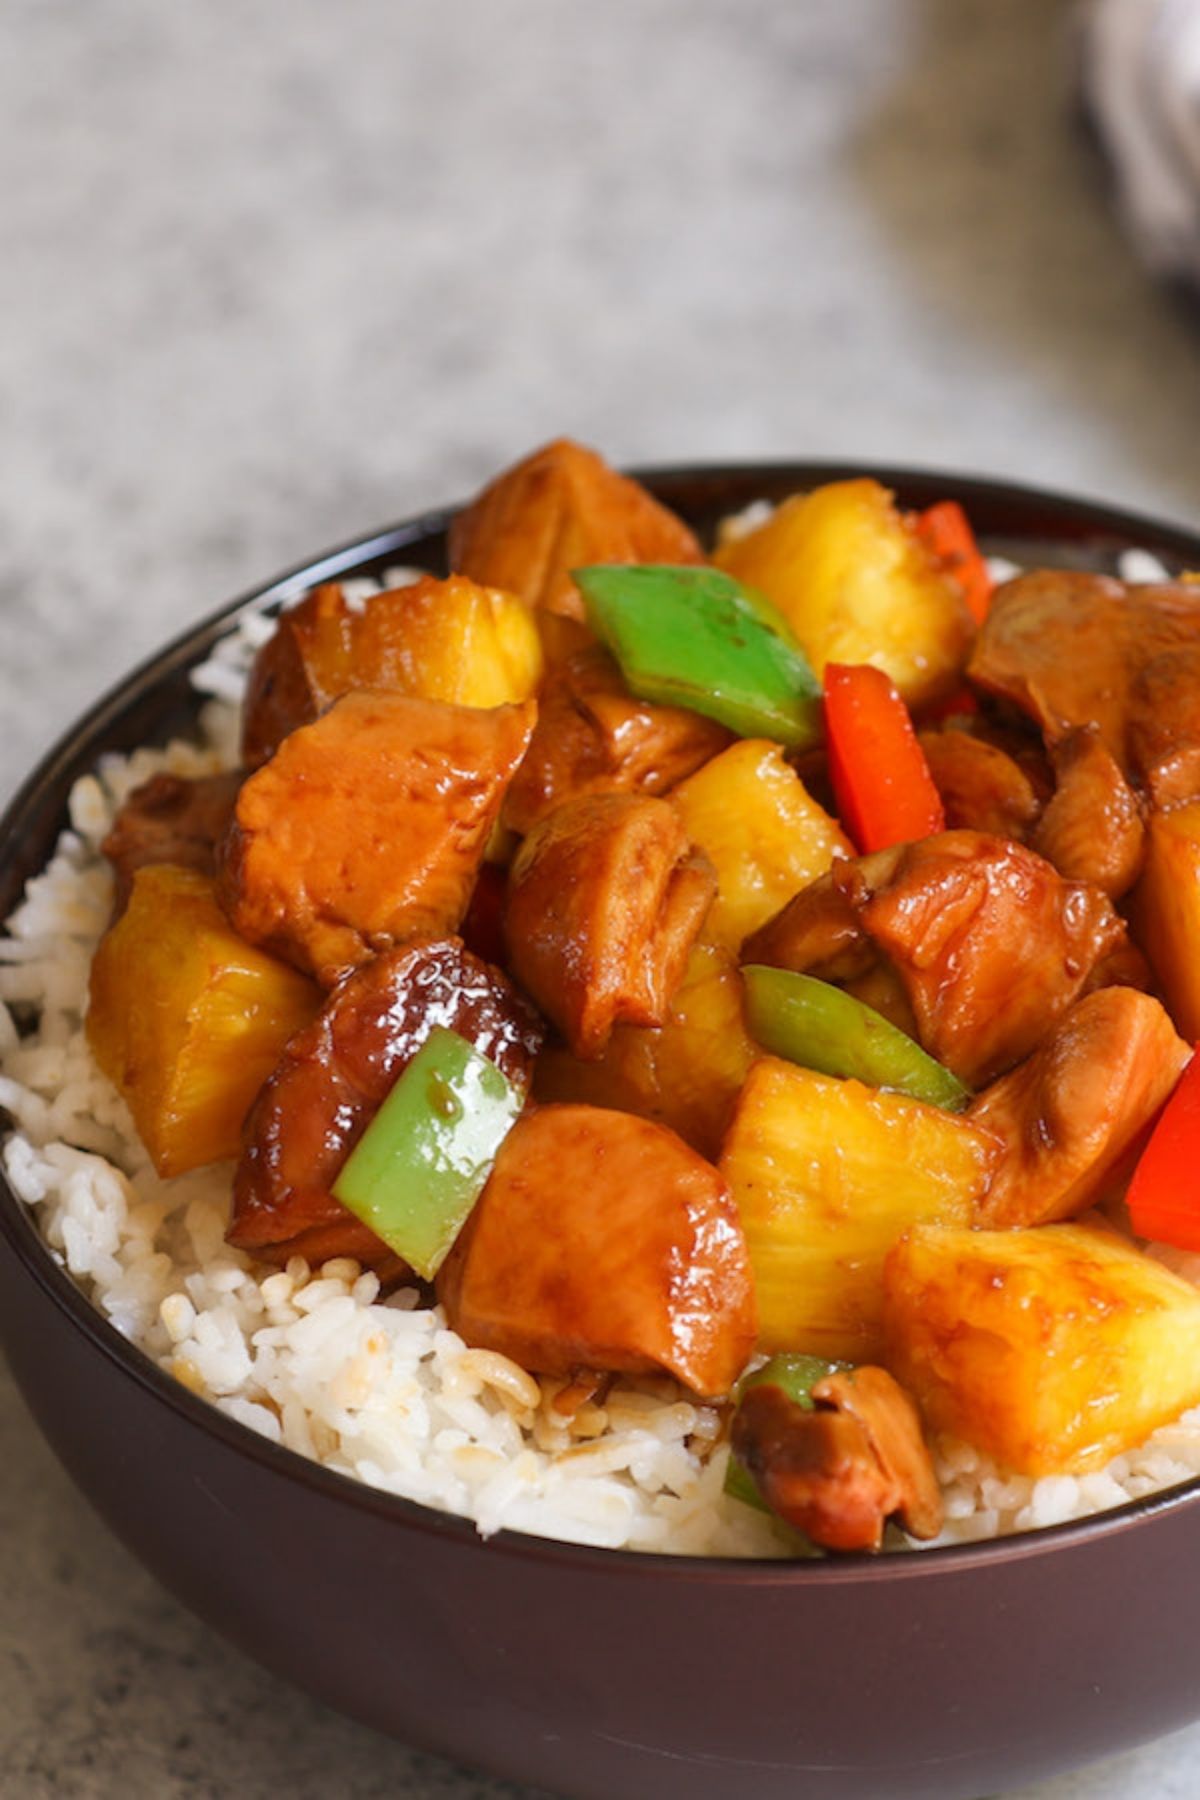 If you’re craving sweet and sour chicken but don’t want to eat out, this Sweet Hawaiian Crockpot Chicken is the perfect recipe for you. It’s easily made in the crockpot, freeing up the amount of time you need to spend in the kitchen. It’s also easy to prepare, thanks to the boneless, skinless chicken thighs. We think your family will love the tropical pineapple flavor!